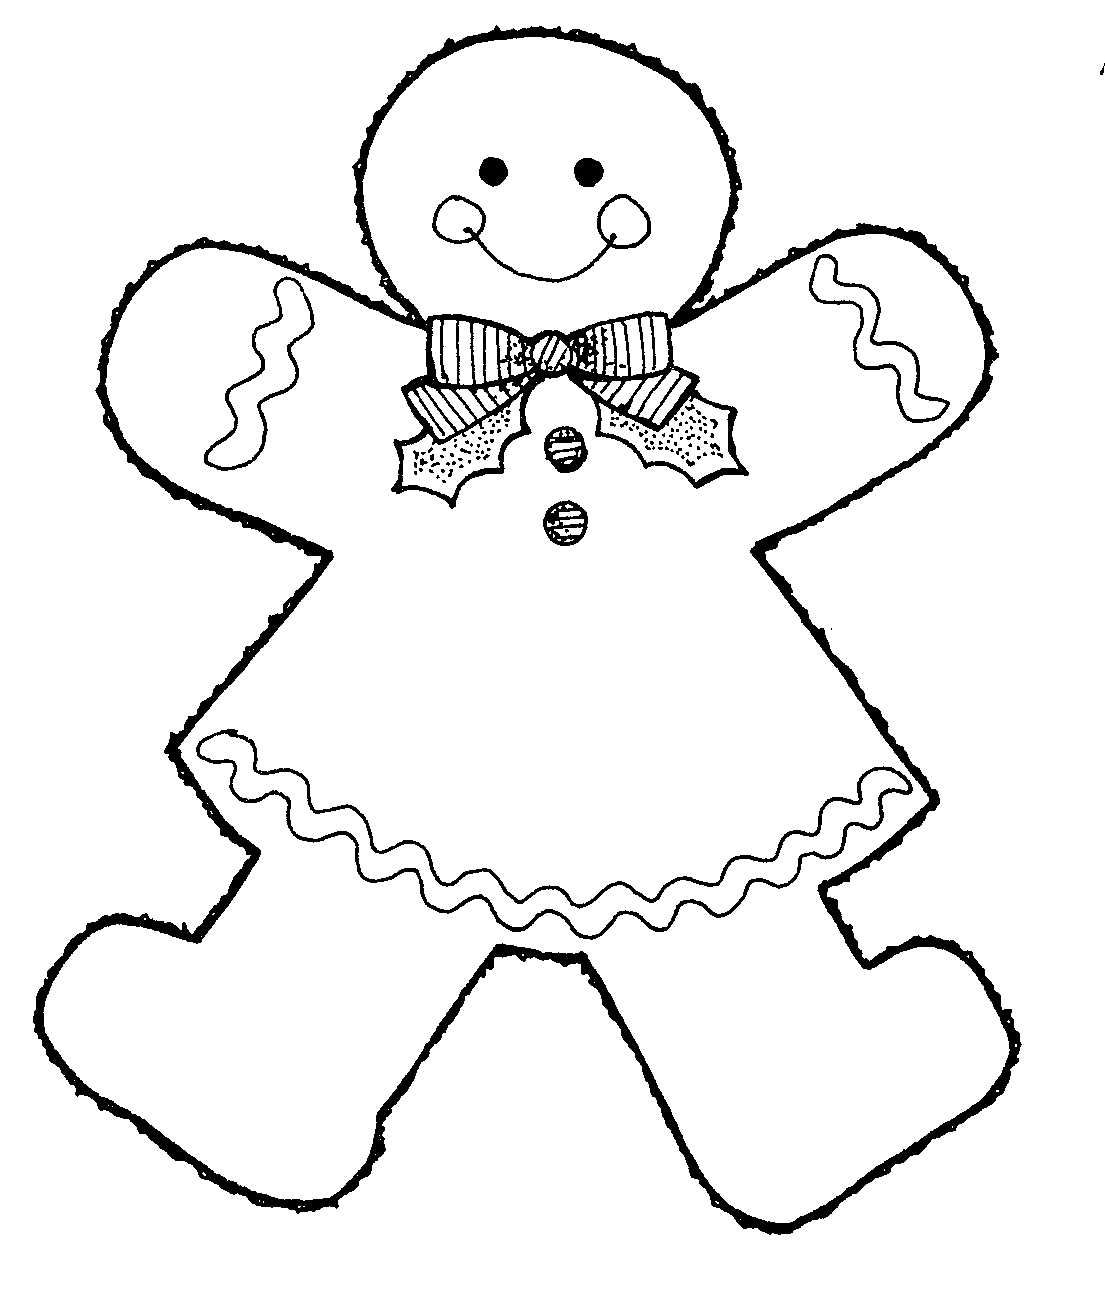 Images For > Gingerbread Man Clip Art